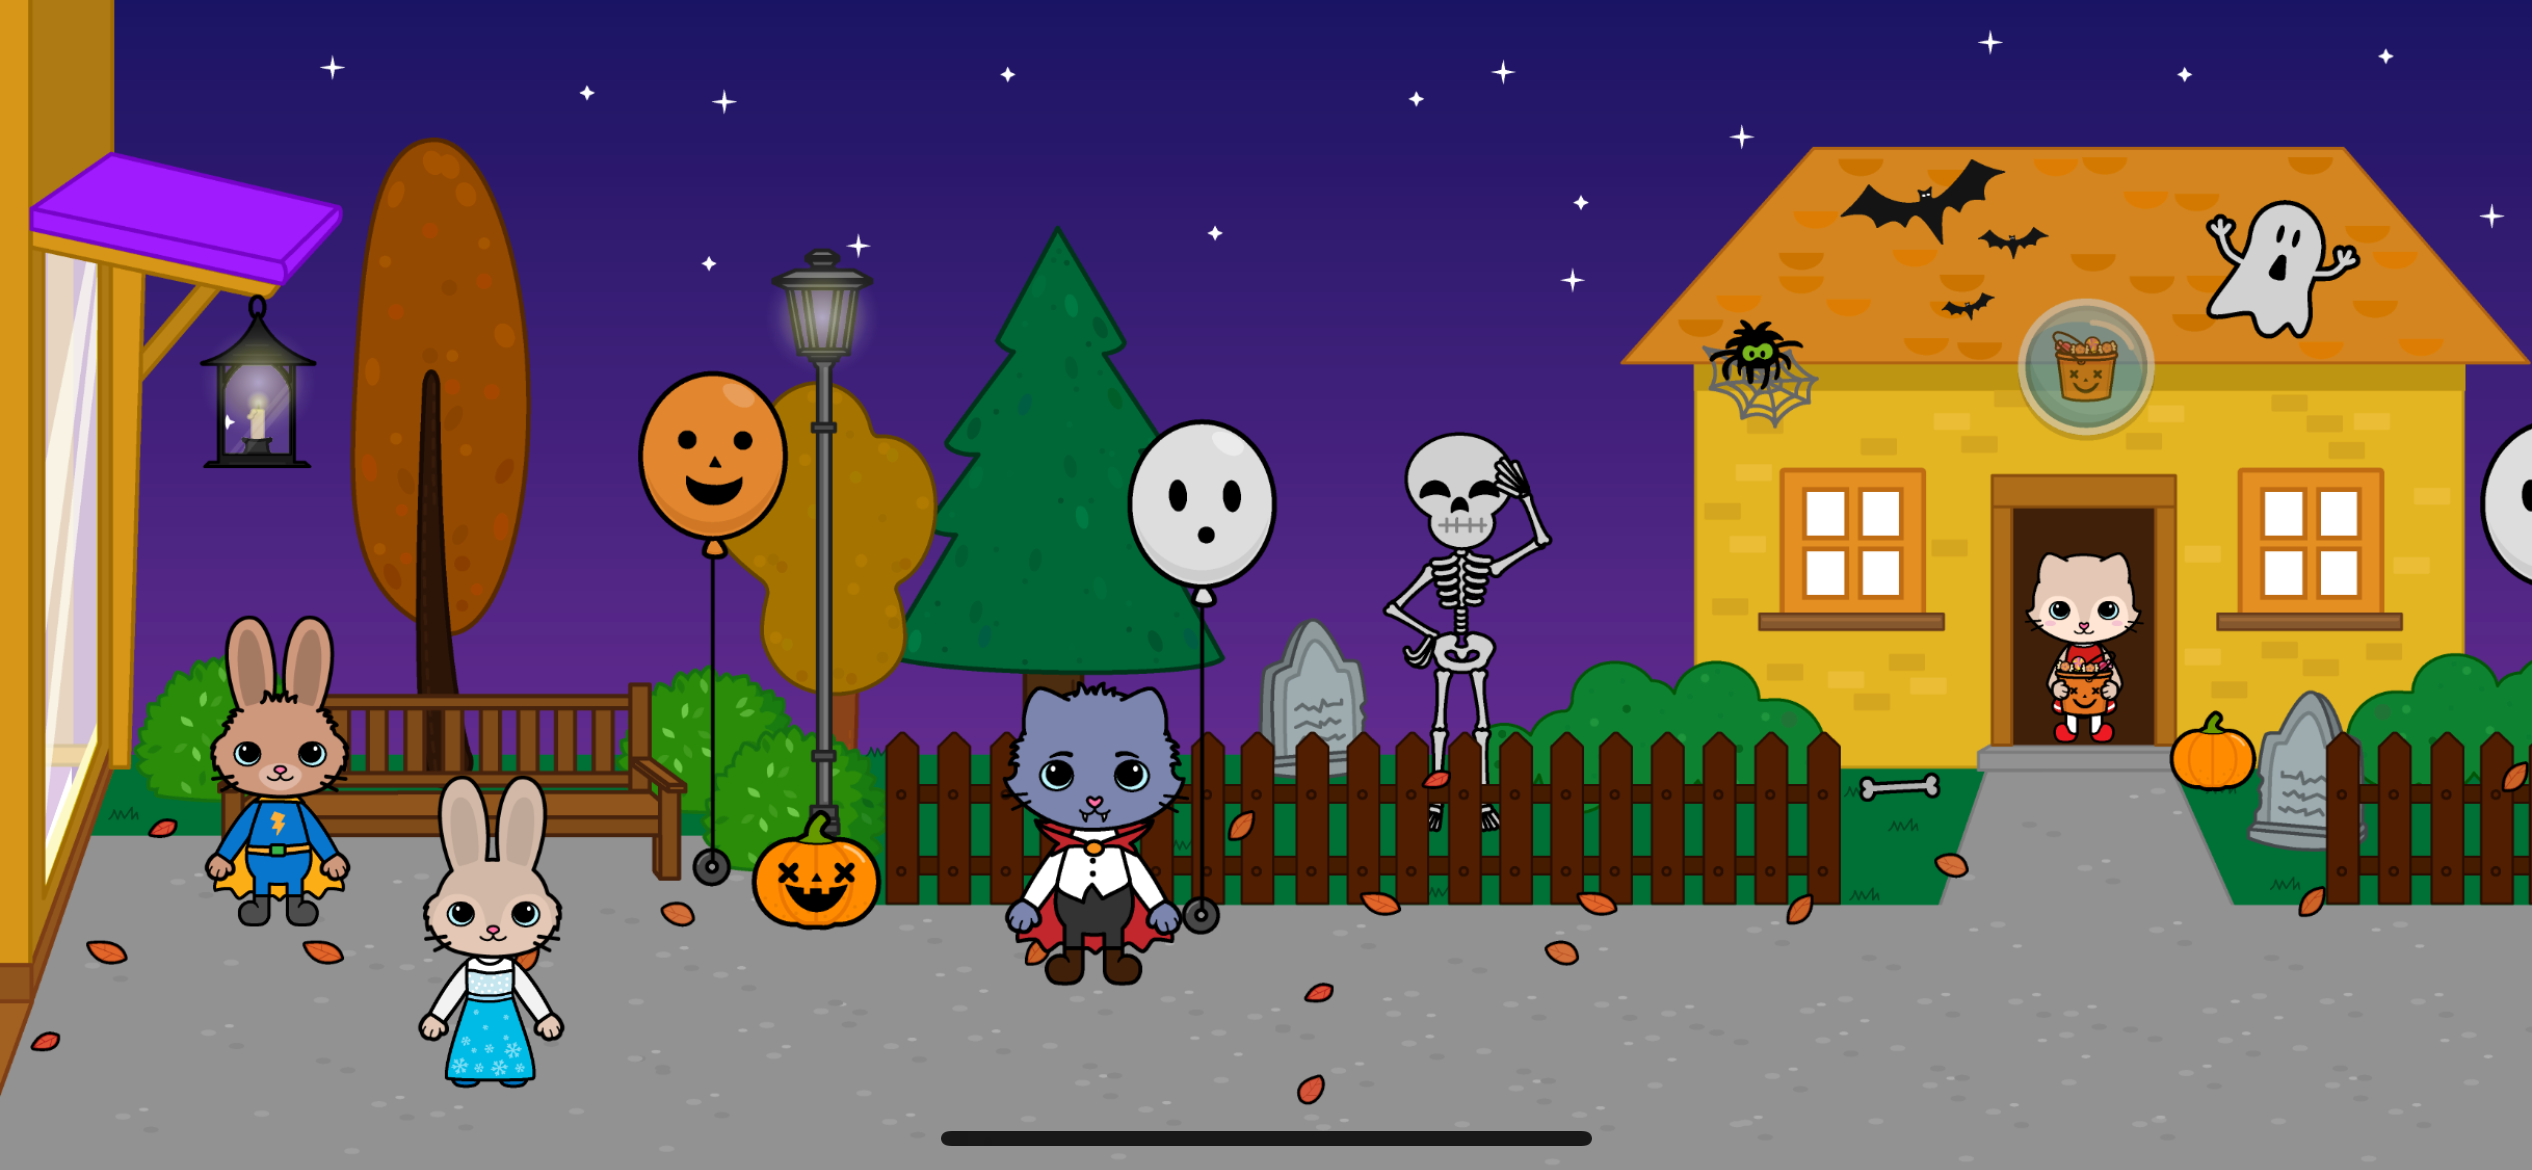 Yasa Pets Halloween screenshot, showing the characters outside, trick or treating